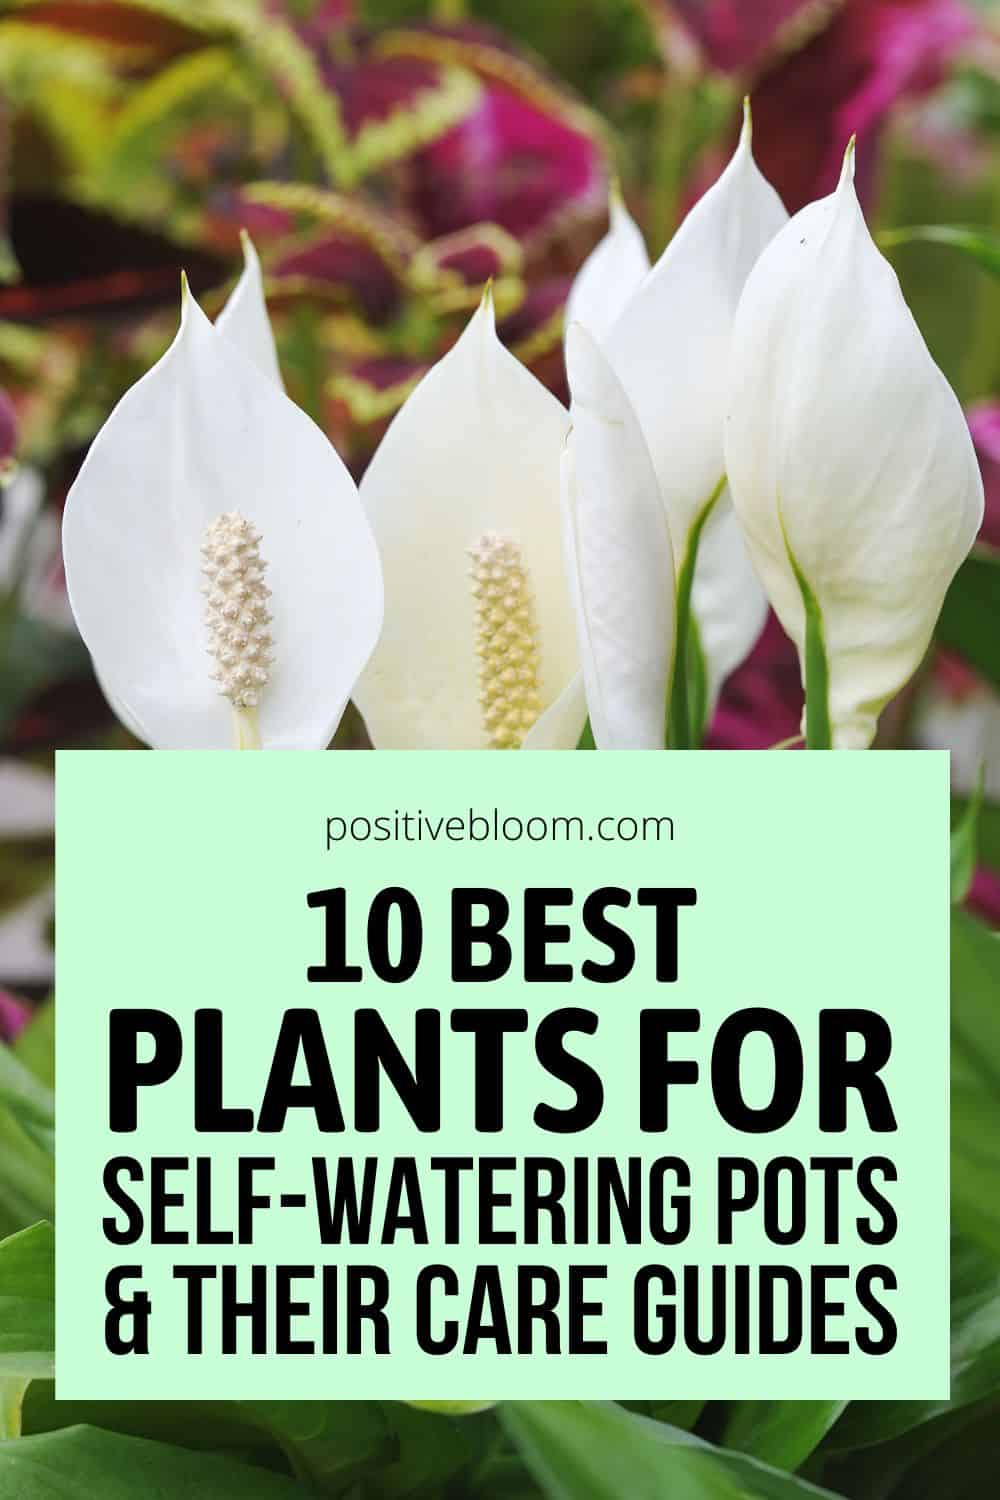 10 Best Plants For Self-Watering Pots And Their Care Guides Pinterest